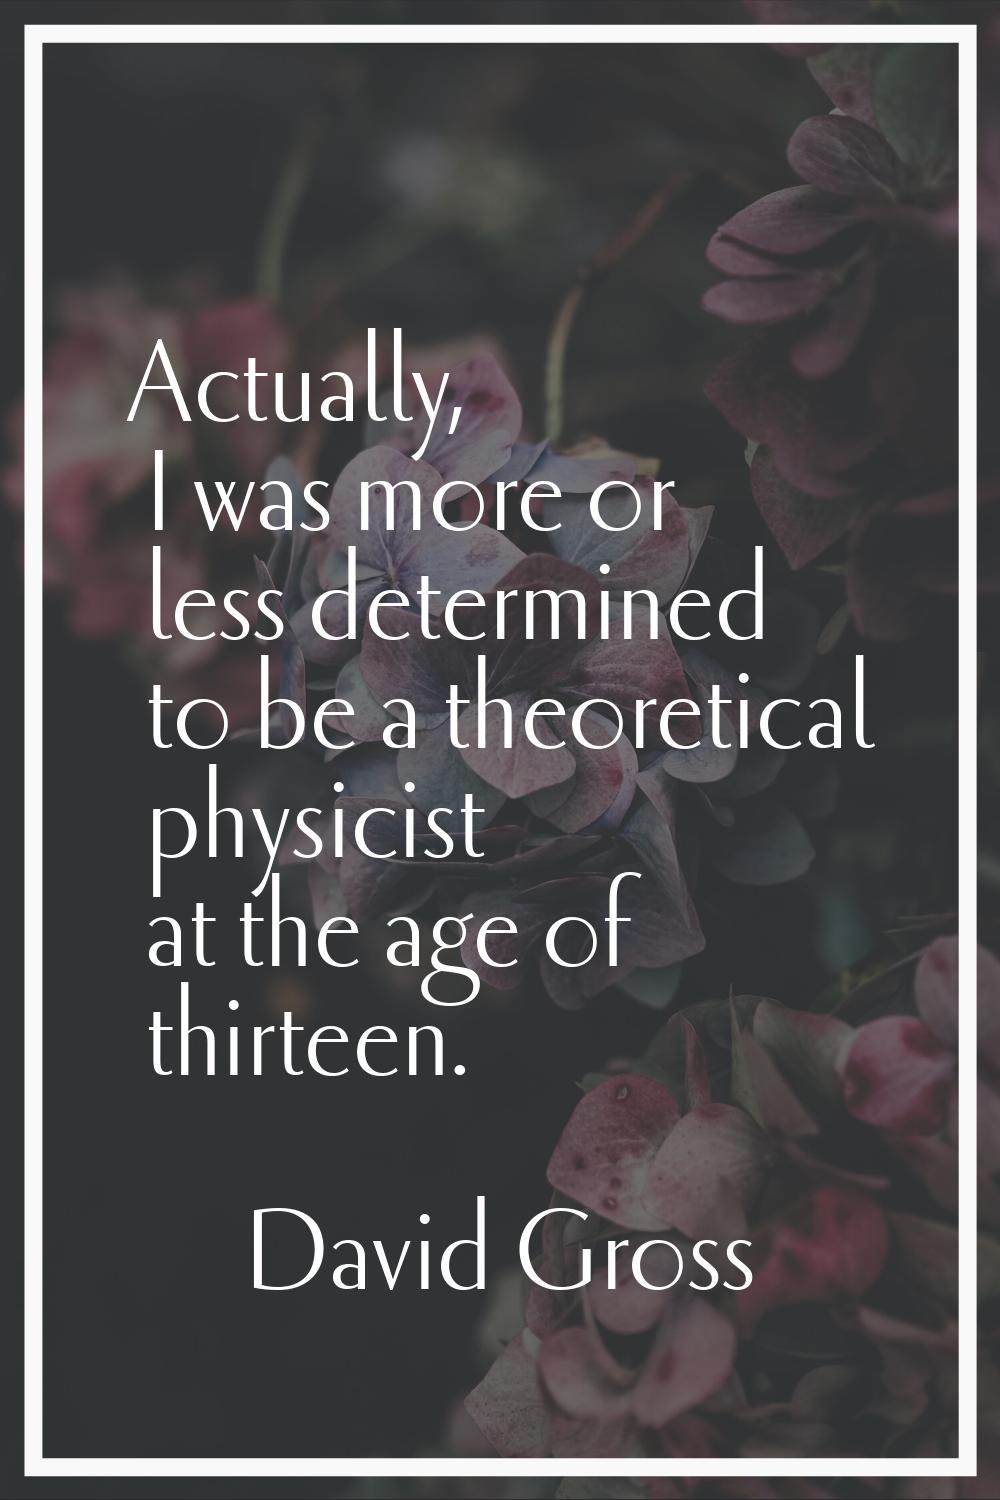 Actually, I was more or less determined to be a theoretical physicist at the age of thirteen.